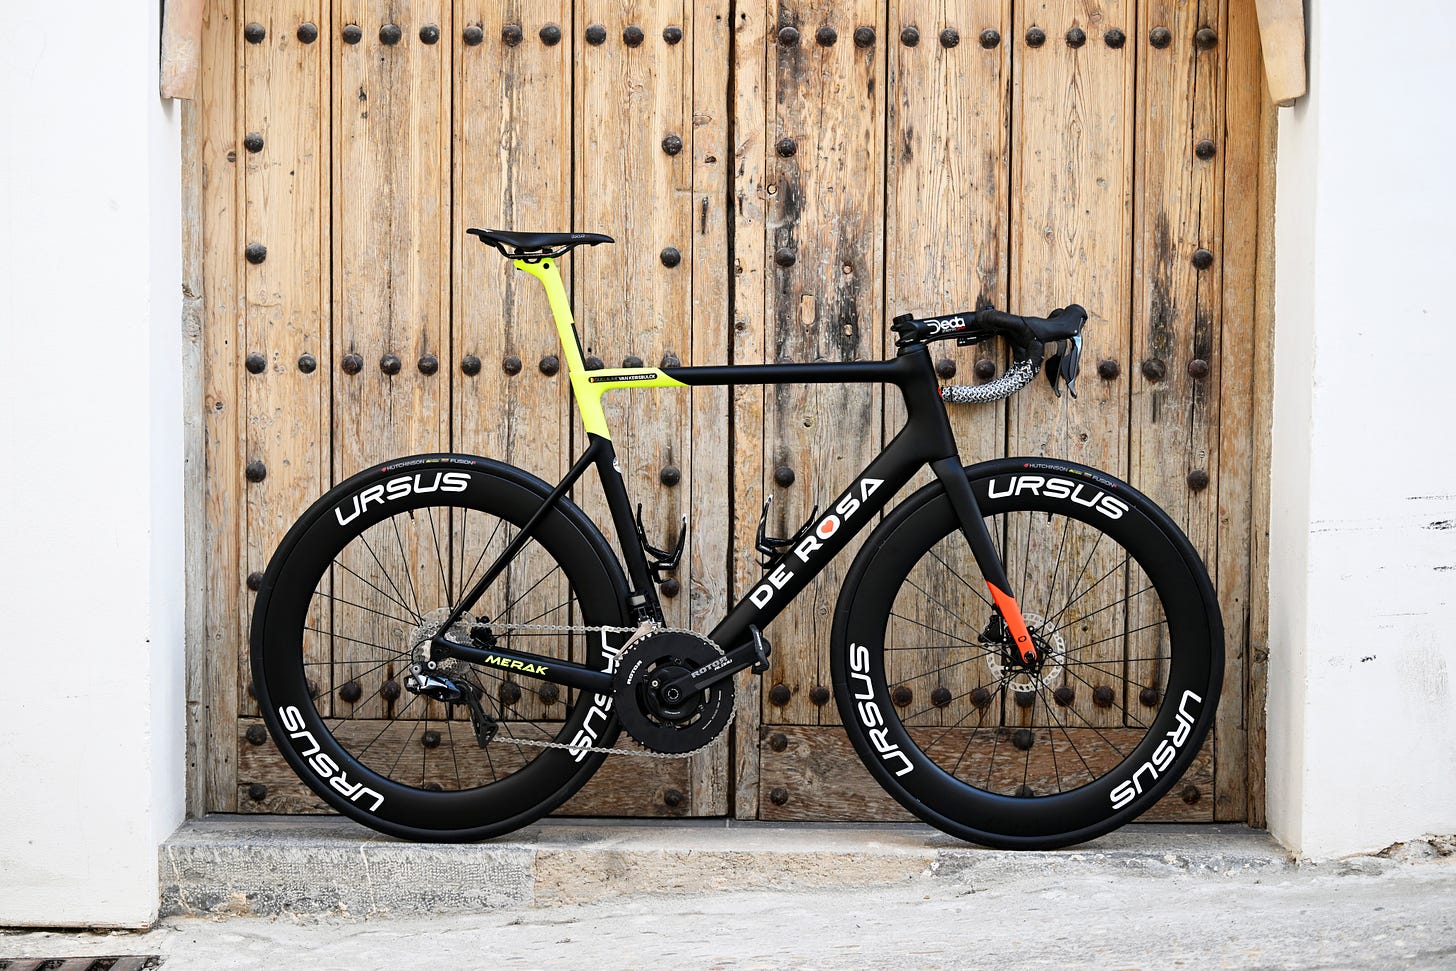 The 2023 De Rosa Merak of Bingoal Wallonie Bruxelles. It is topped off with Ursus 67s, Rotor Aldu crankset, Hutchinson Tyres, Deda Cockpit, Selle Repente saddles, look pedals, swissstop brakes, and Shimano 11-speed groupset, in front of a farm door in the heart of Altea, the heartlands for a cyclist's winter training. 